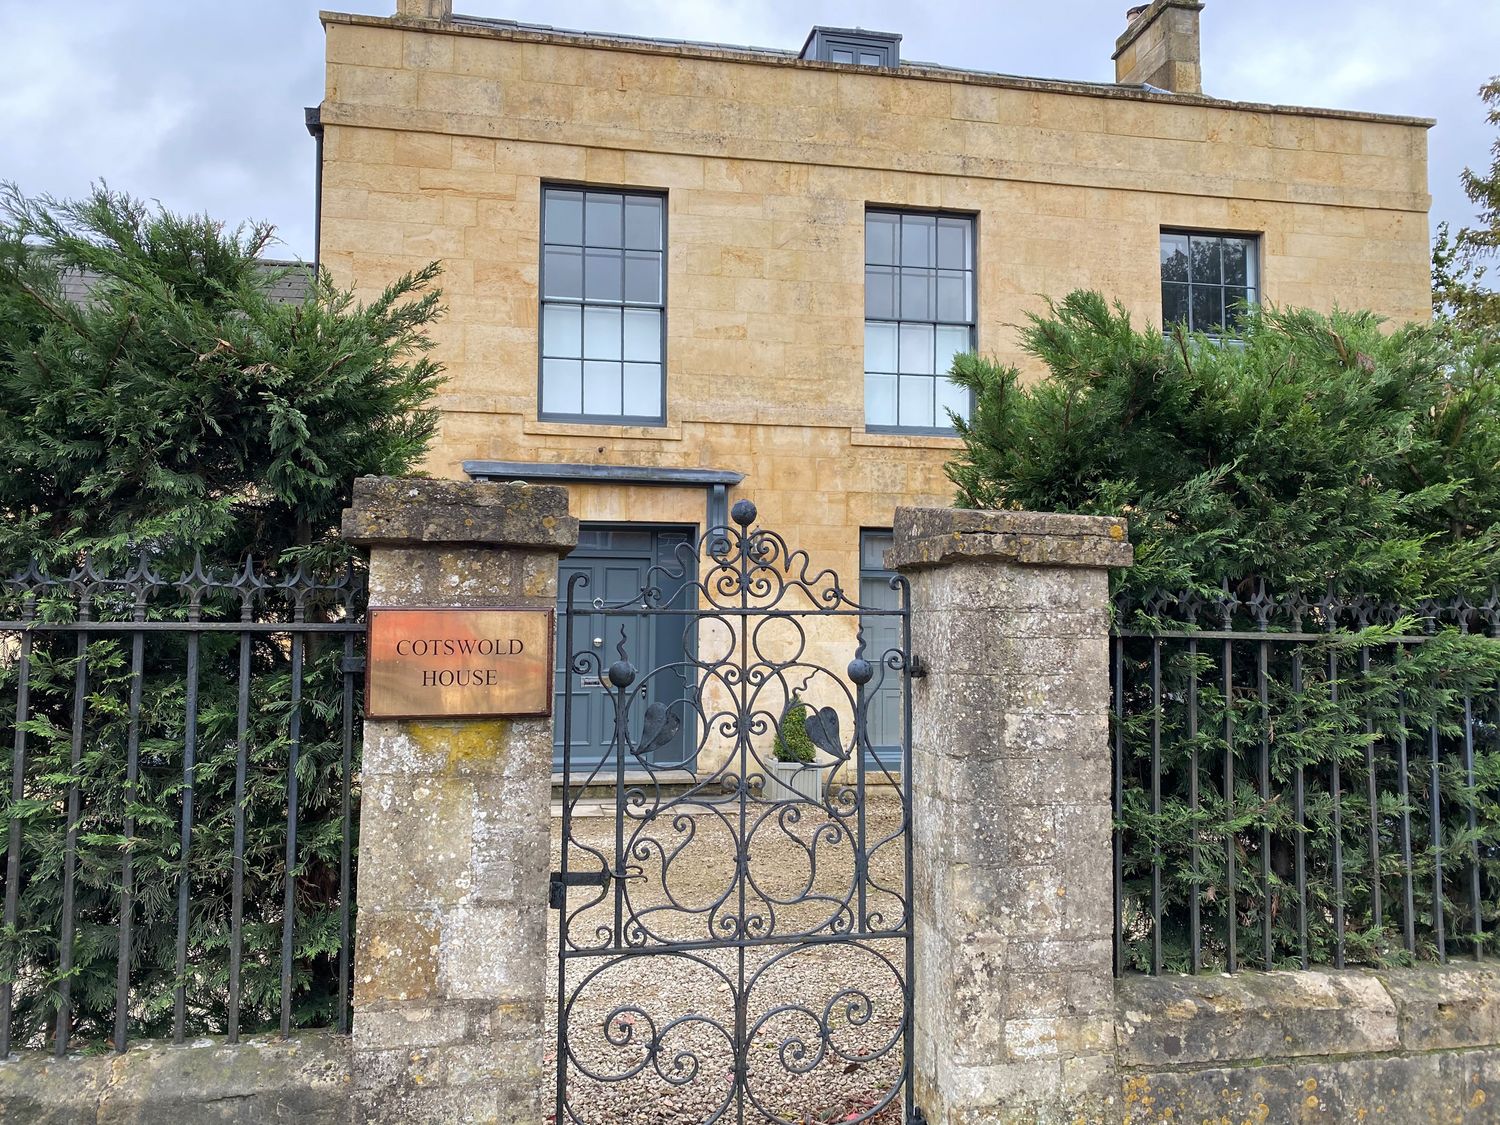 Cotswold House - Cotswolds - 988742 - photo 1